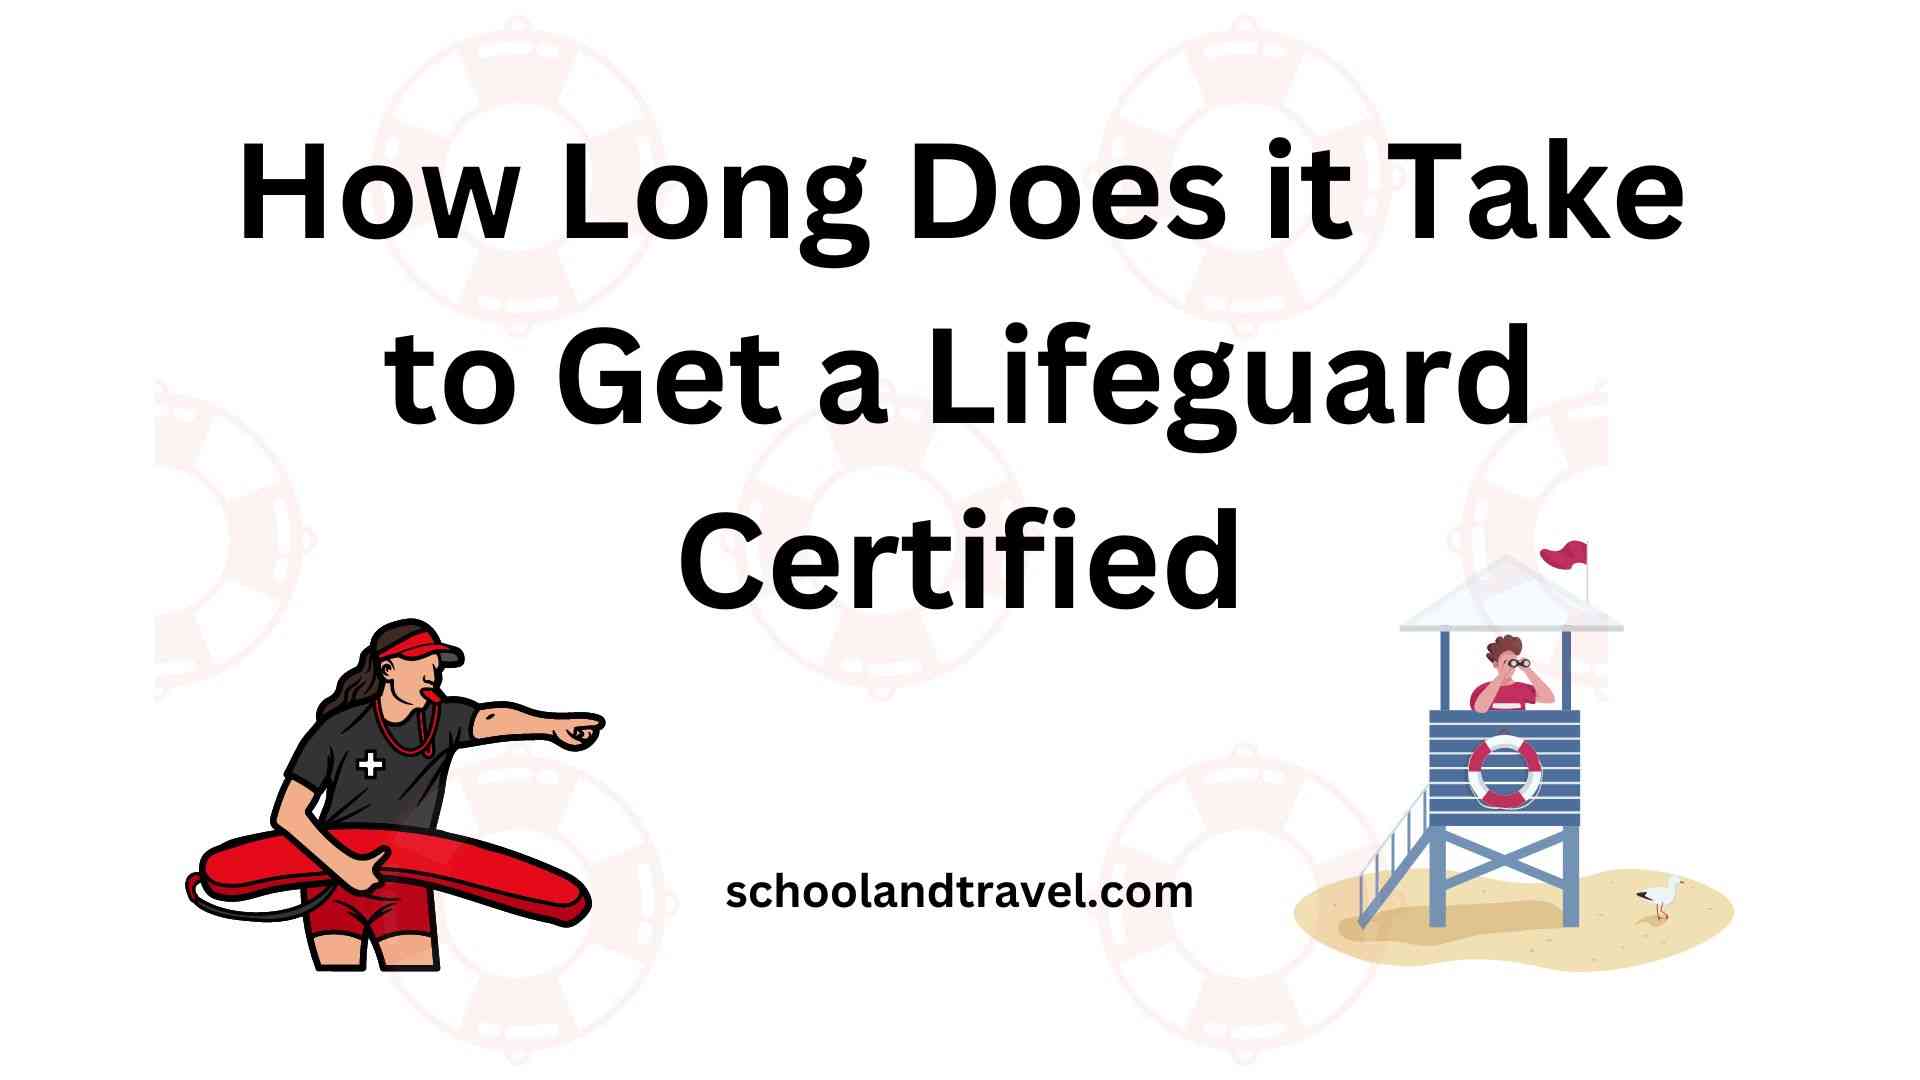 How Long Does it Take to Get a Lifeguard Certified?